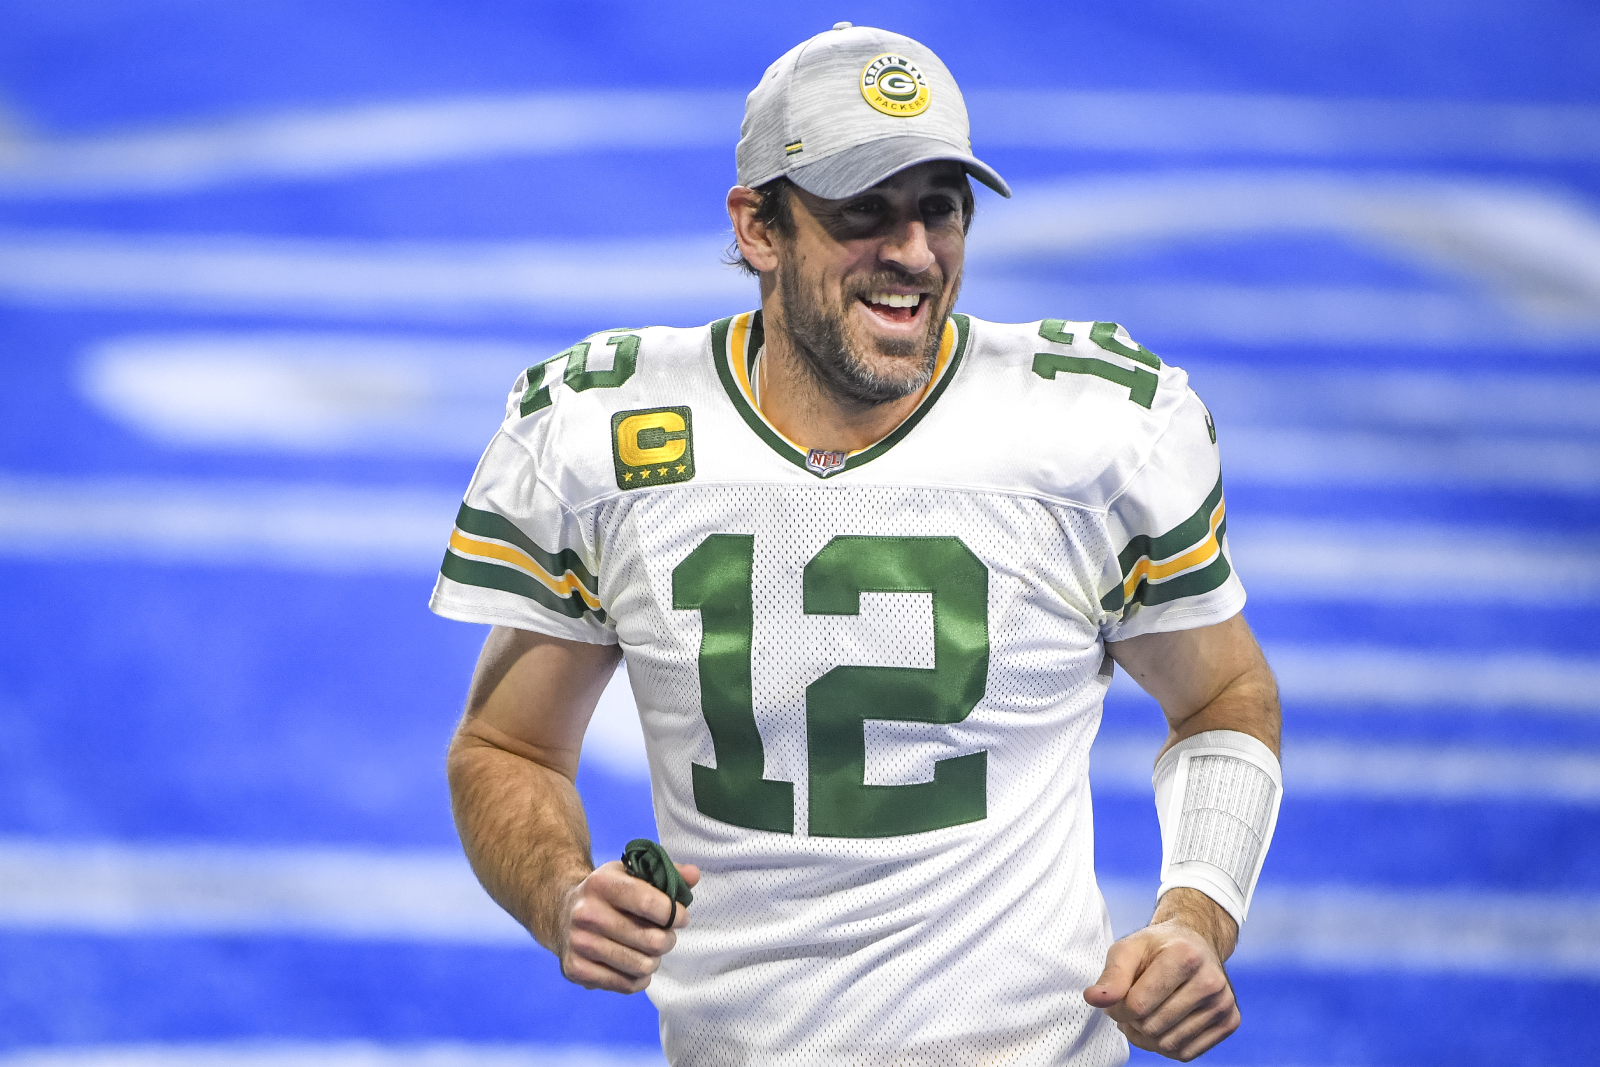 Many people love to have the GOAT debate for NFL quarterbacks. Green Bay Packers QB Aaron Rodgers recently addressed the debate.